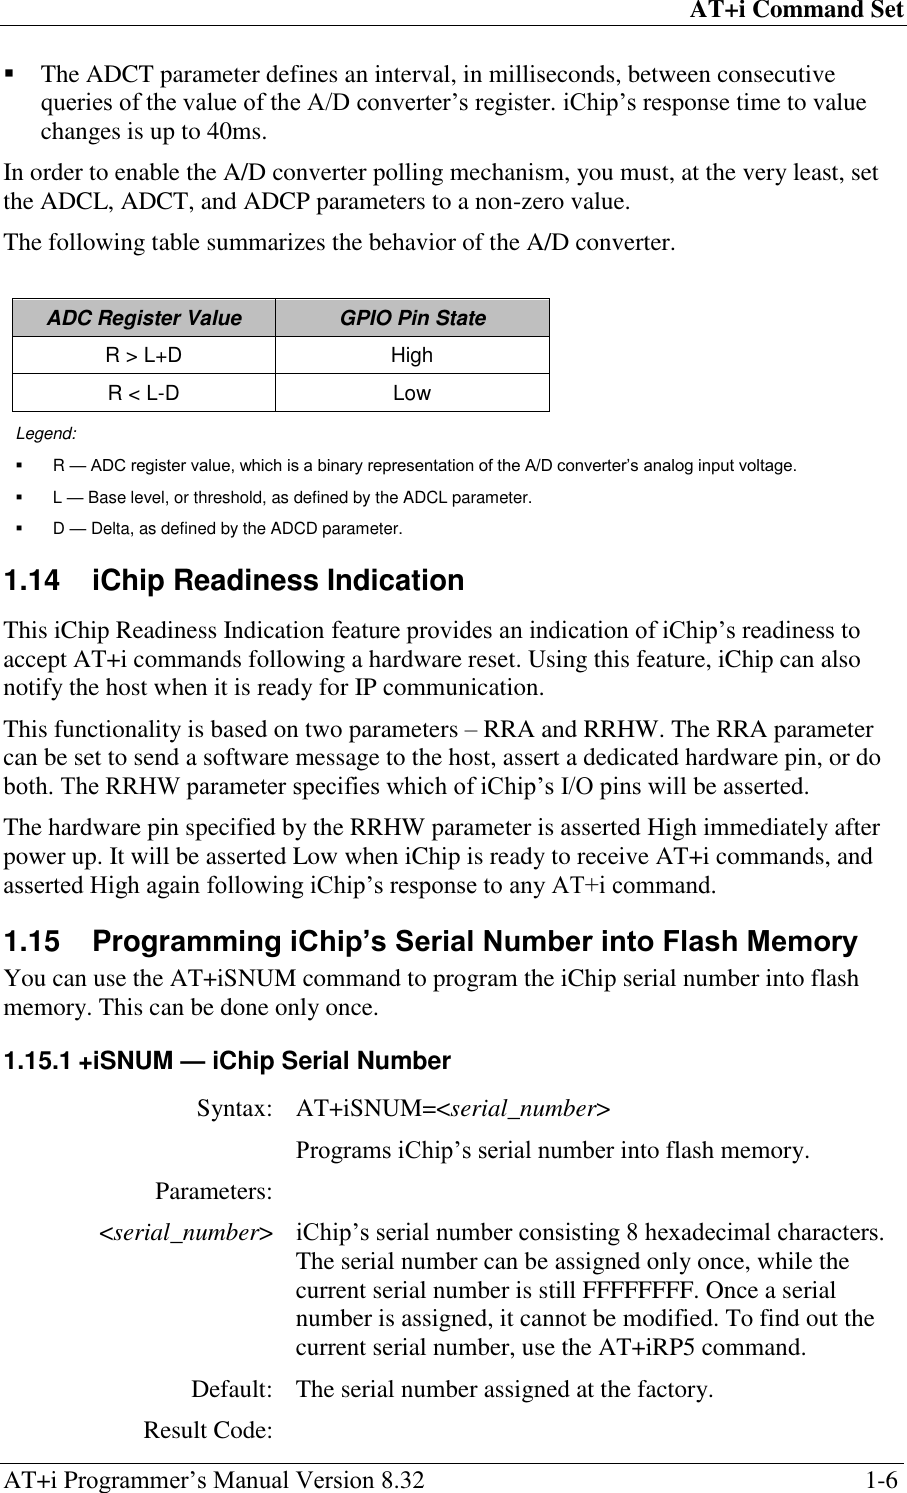 AT+i Command Set AT+i Programmer‘s Manual Version 8.32  1-6  The ADCT parameter defines an interval, in milliseconds, between consecutive queries of the value of the A/D converter‘s register. iChip‘s response time to value changes is up to 40ms. In order to enable the A/D converter polling mechanism, you must, at the very least, set the ADCL, ADCT, and ADCP parameters to a non-zero value. The following table summarizes the behavior of the A/D converter.  ADC Register Value GPIO Pin State R &gt; L+D High R &lt; L-D Low Legend:  R — ADC register value, which is a binary representation of the A/D converter’s analog input voltage.  L — Base level, or threshold, as defined by the ADCL parameter.  D — Delta, as defined by the ADCD parameter. 1.14  iChip Readiness Indication This iChip Readiness Indication feature provides an indication of iChip‘s readiness to accept AT+i commands following a hardware reset. Using this feature, iChip can also notify the host when it is ready for IP communication. This functionality is based on two parameters – RRA and RRHW. The RRA parameter can be set to send a software message to the host, assert a dedicated hardware pin, or do both. The RRHW parameter specifies which of iChip‘s I/O pins will be asserted. The hardware pin specified by the RRHW parameter is asserted High immediately after power up. It will be asserted Low when iChip is ready to receive AT+i commands, and asserted High again following iChip‘s response to any AT+i command. 1.15  Programming iChip’s Serial Number into Flash Memory You can use the AT+iSNUM command to program the iChip serial number into flash memory. This can be done only once. 1.15.1 +iSNUM — iChip Serial Number Syntax: AT+iSNUM=&lt;serial_number&gt;  Programs iChip‘s serial number into flash memory. Parameters:  &lt;serial_number&gt; iChip‘s serial number consisting 8 hexadecimal characters. The serial number can be assigned only once, while the current serial number is still FFFFFFFF. Once a serial number is assigned, it cannot be modified. To find out the current serial number, use the AT+iRP5 command. Default: The serial number assigned at the factory. Result Code:  